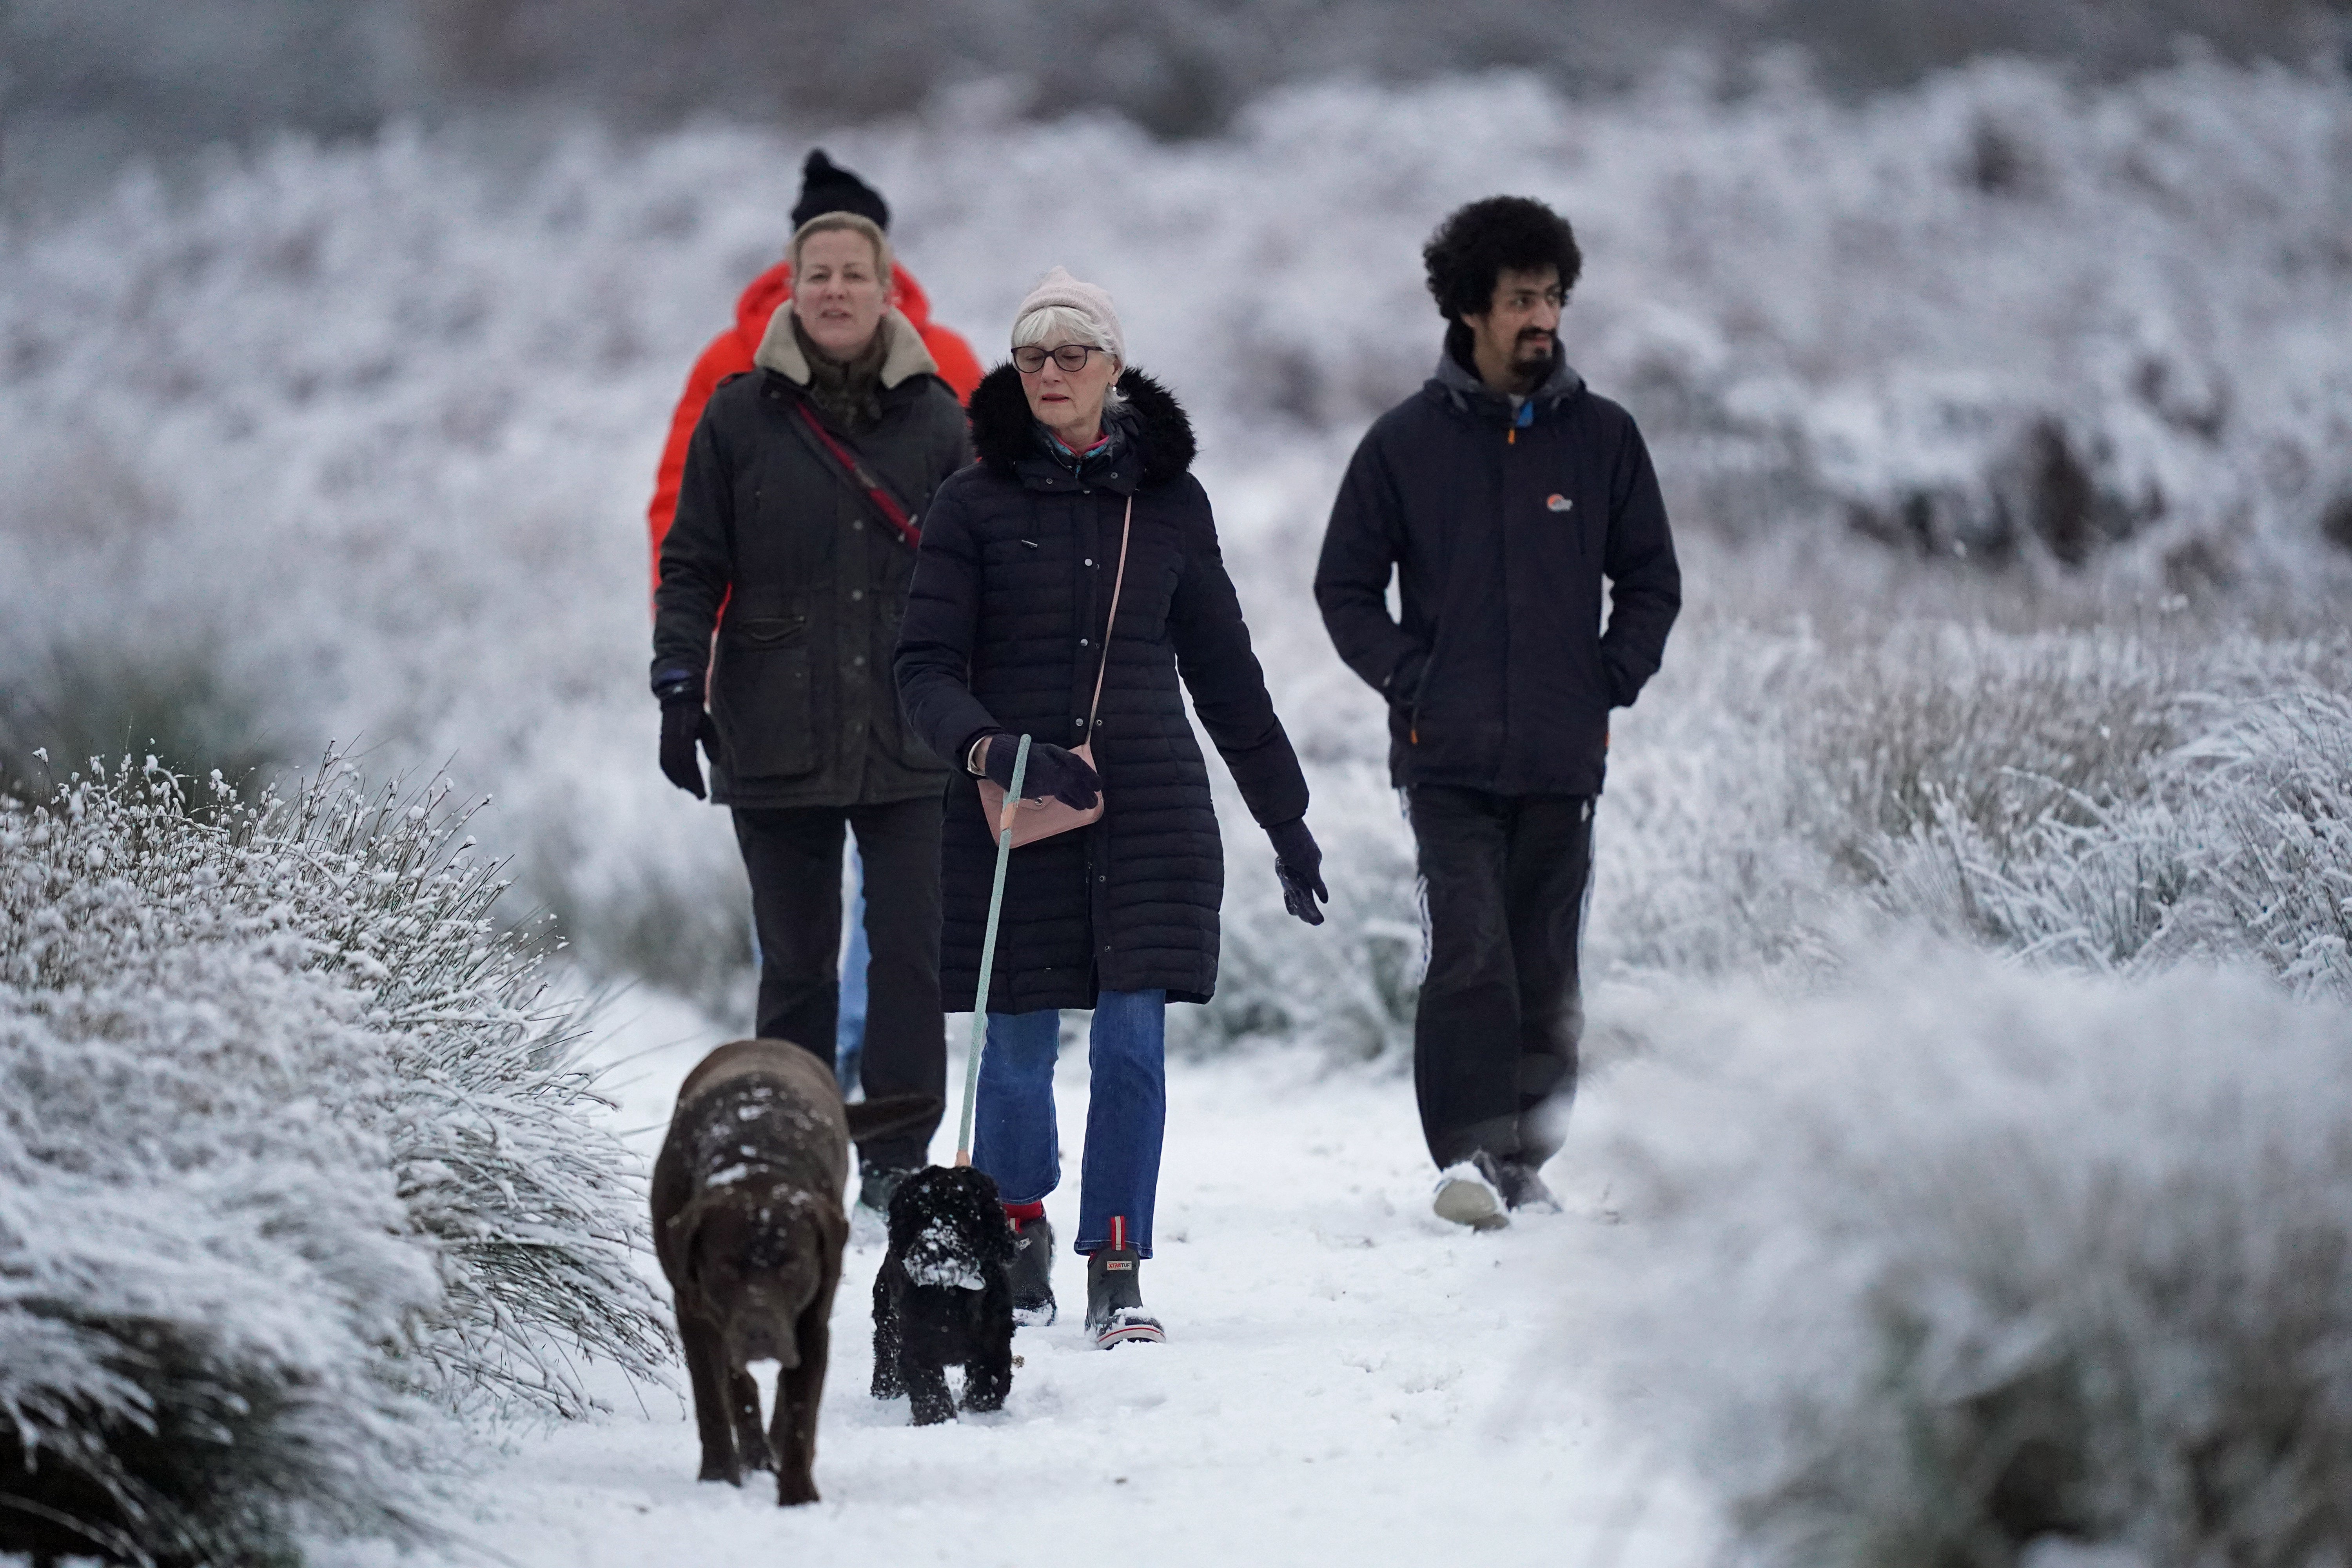 Weather warnings are in place across parts of the UK on Monday